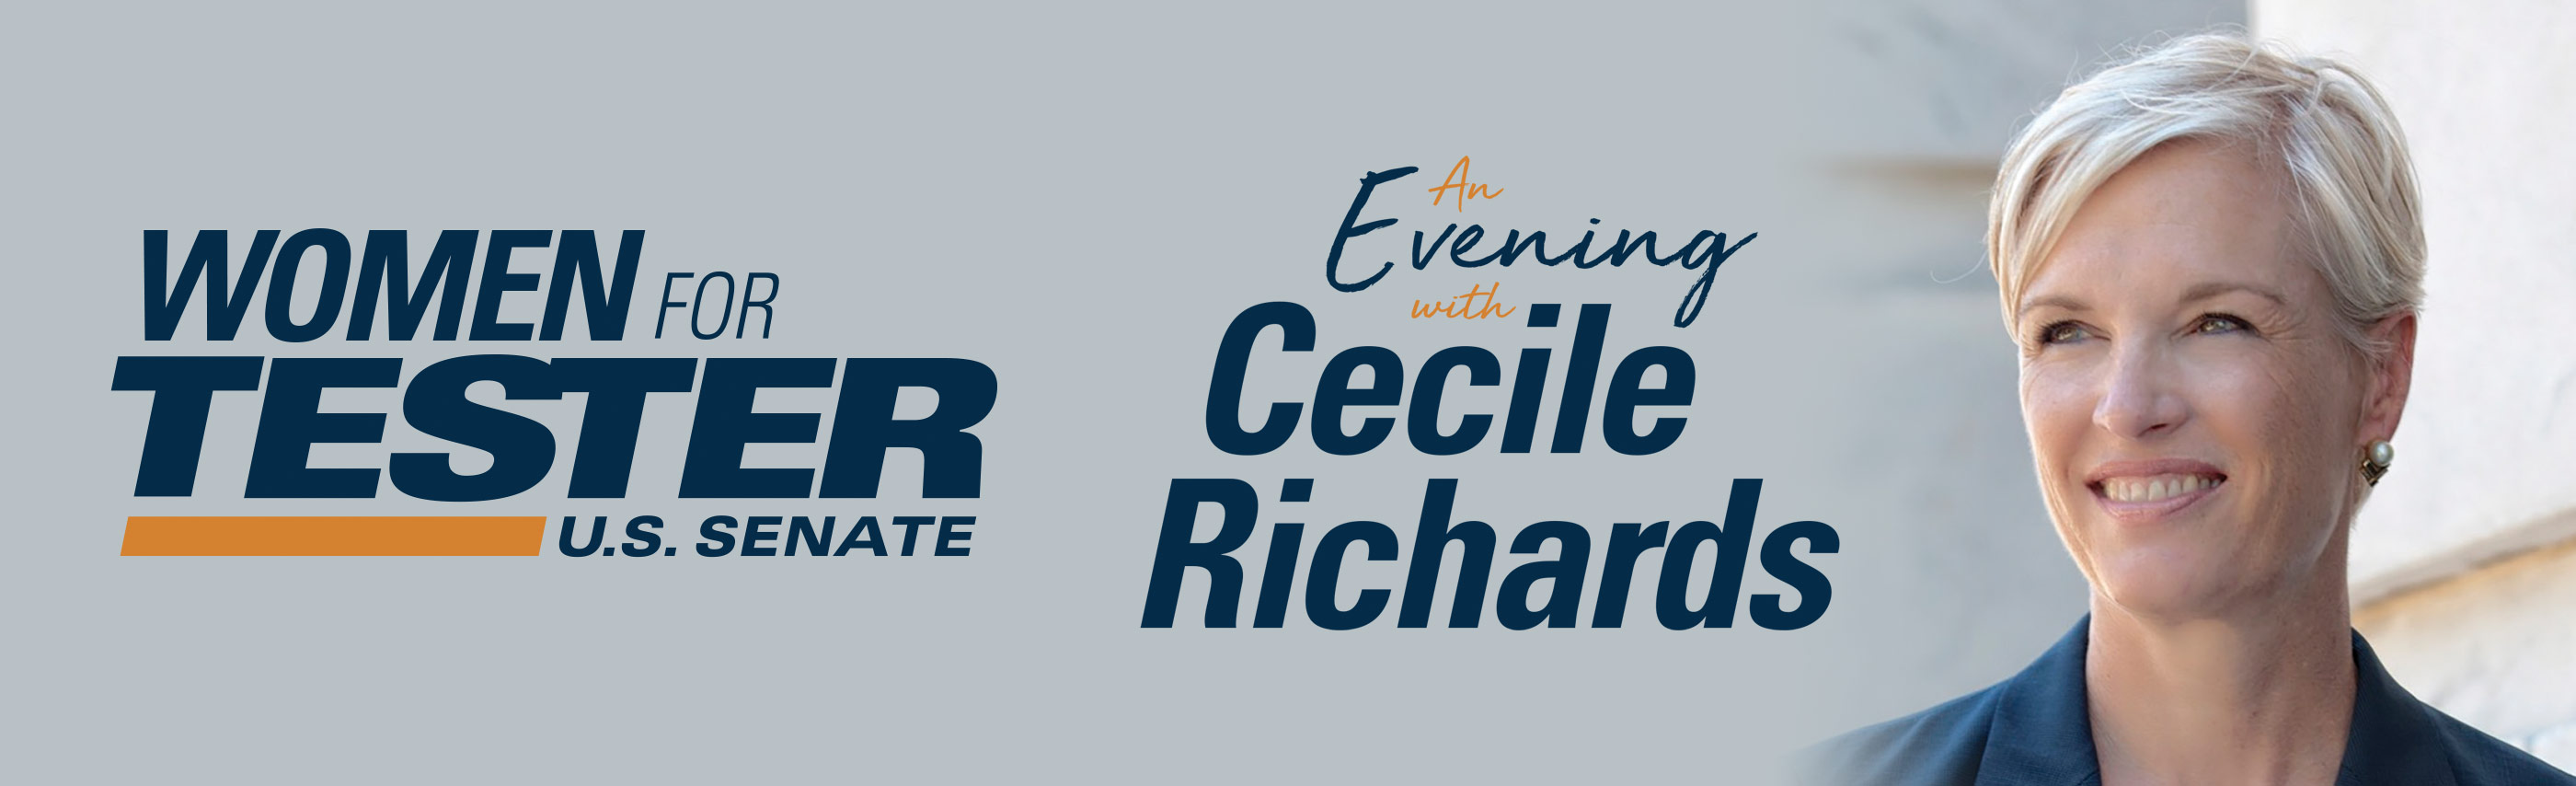 Women For Tester Present an Evening with Cecile Richards